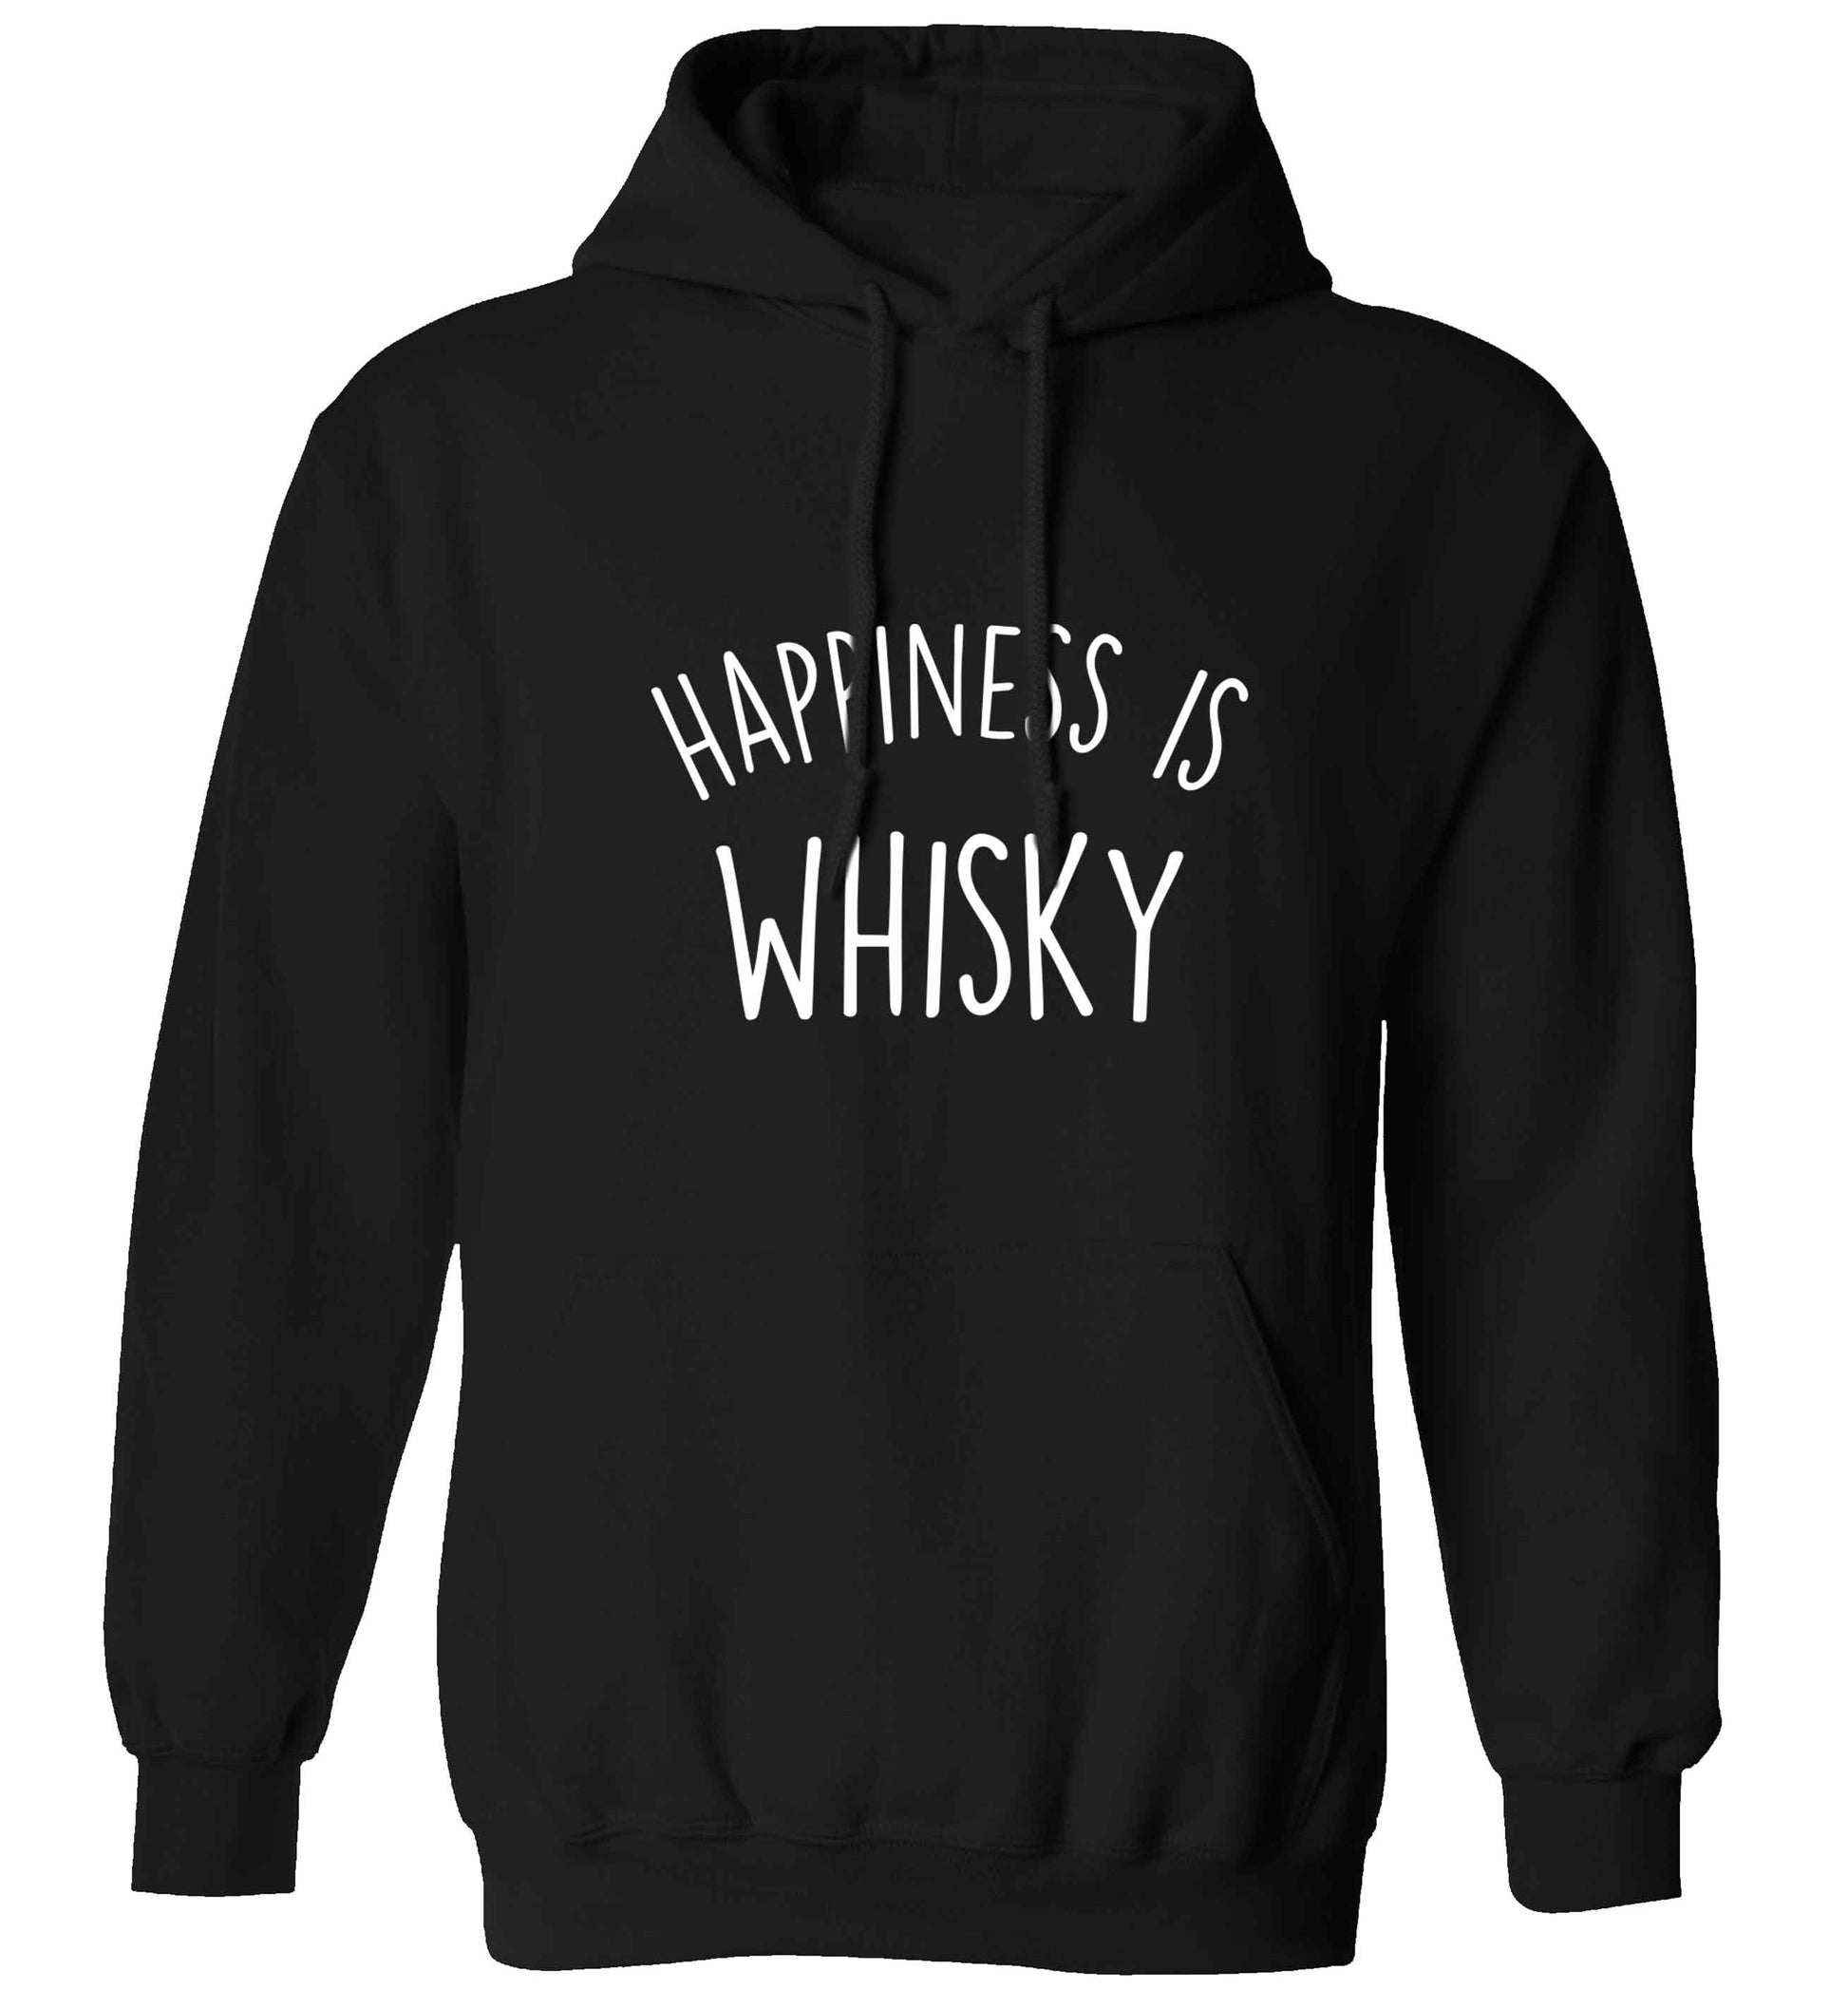 Happiness is whisky adults unisex black hoodie 2XL